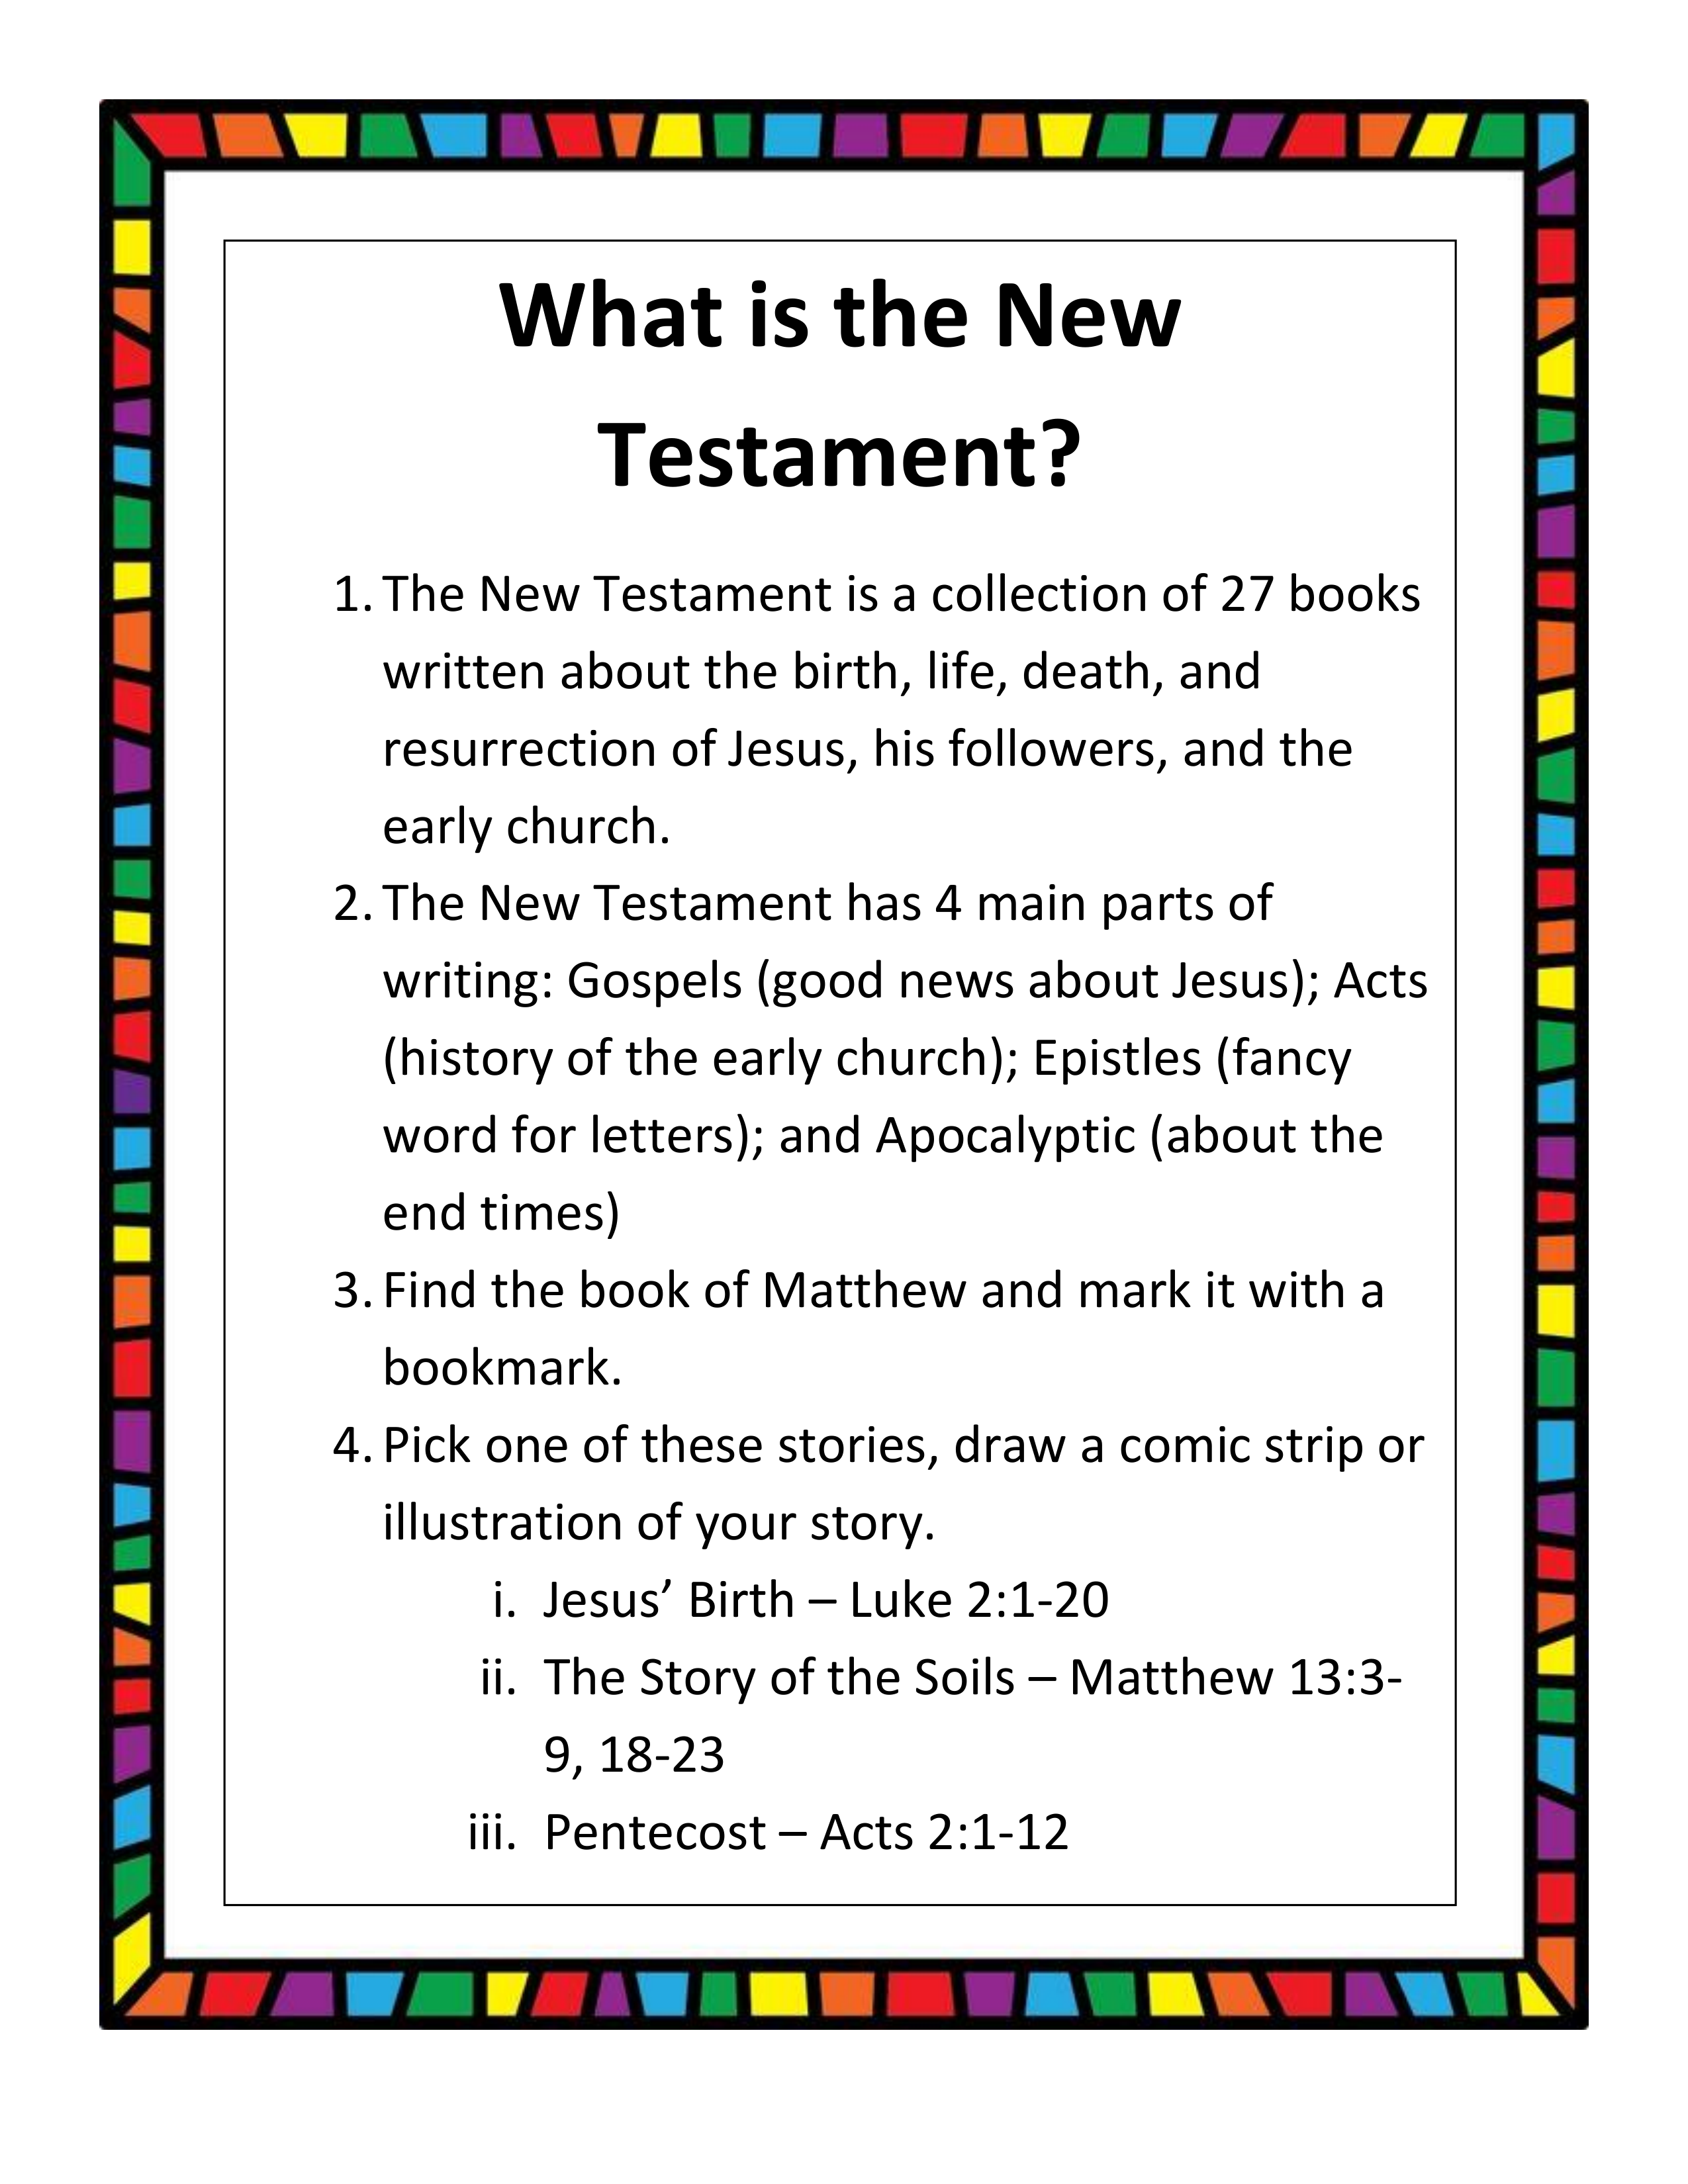 Information for Kids about the New Testament